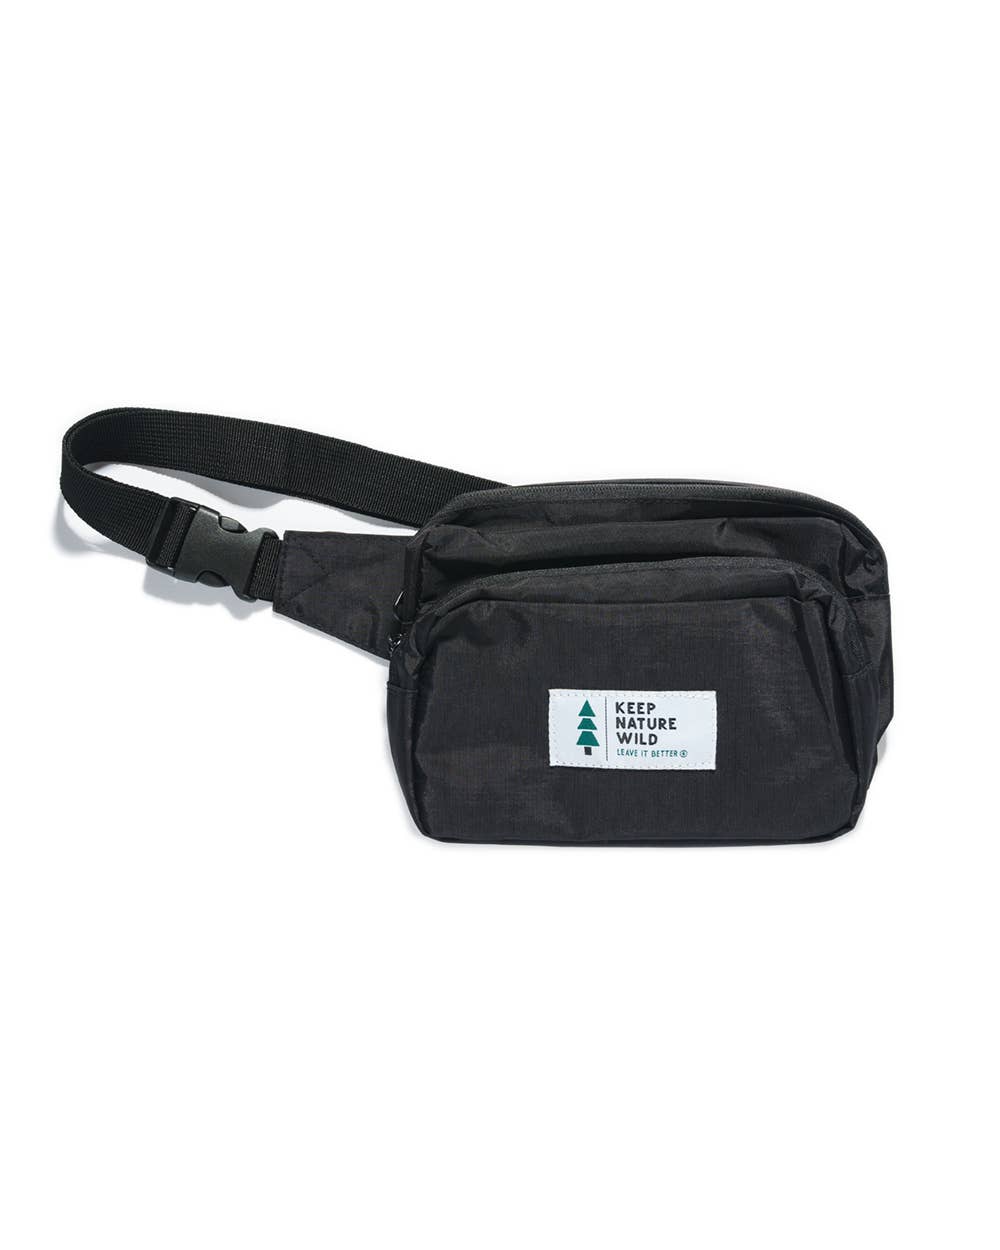 Black Fanny Pack by Keep Nature Wild